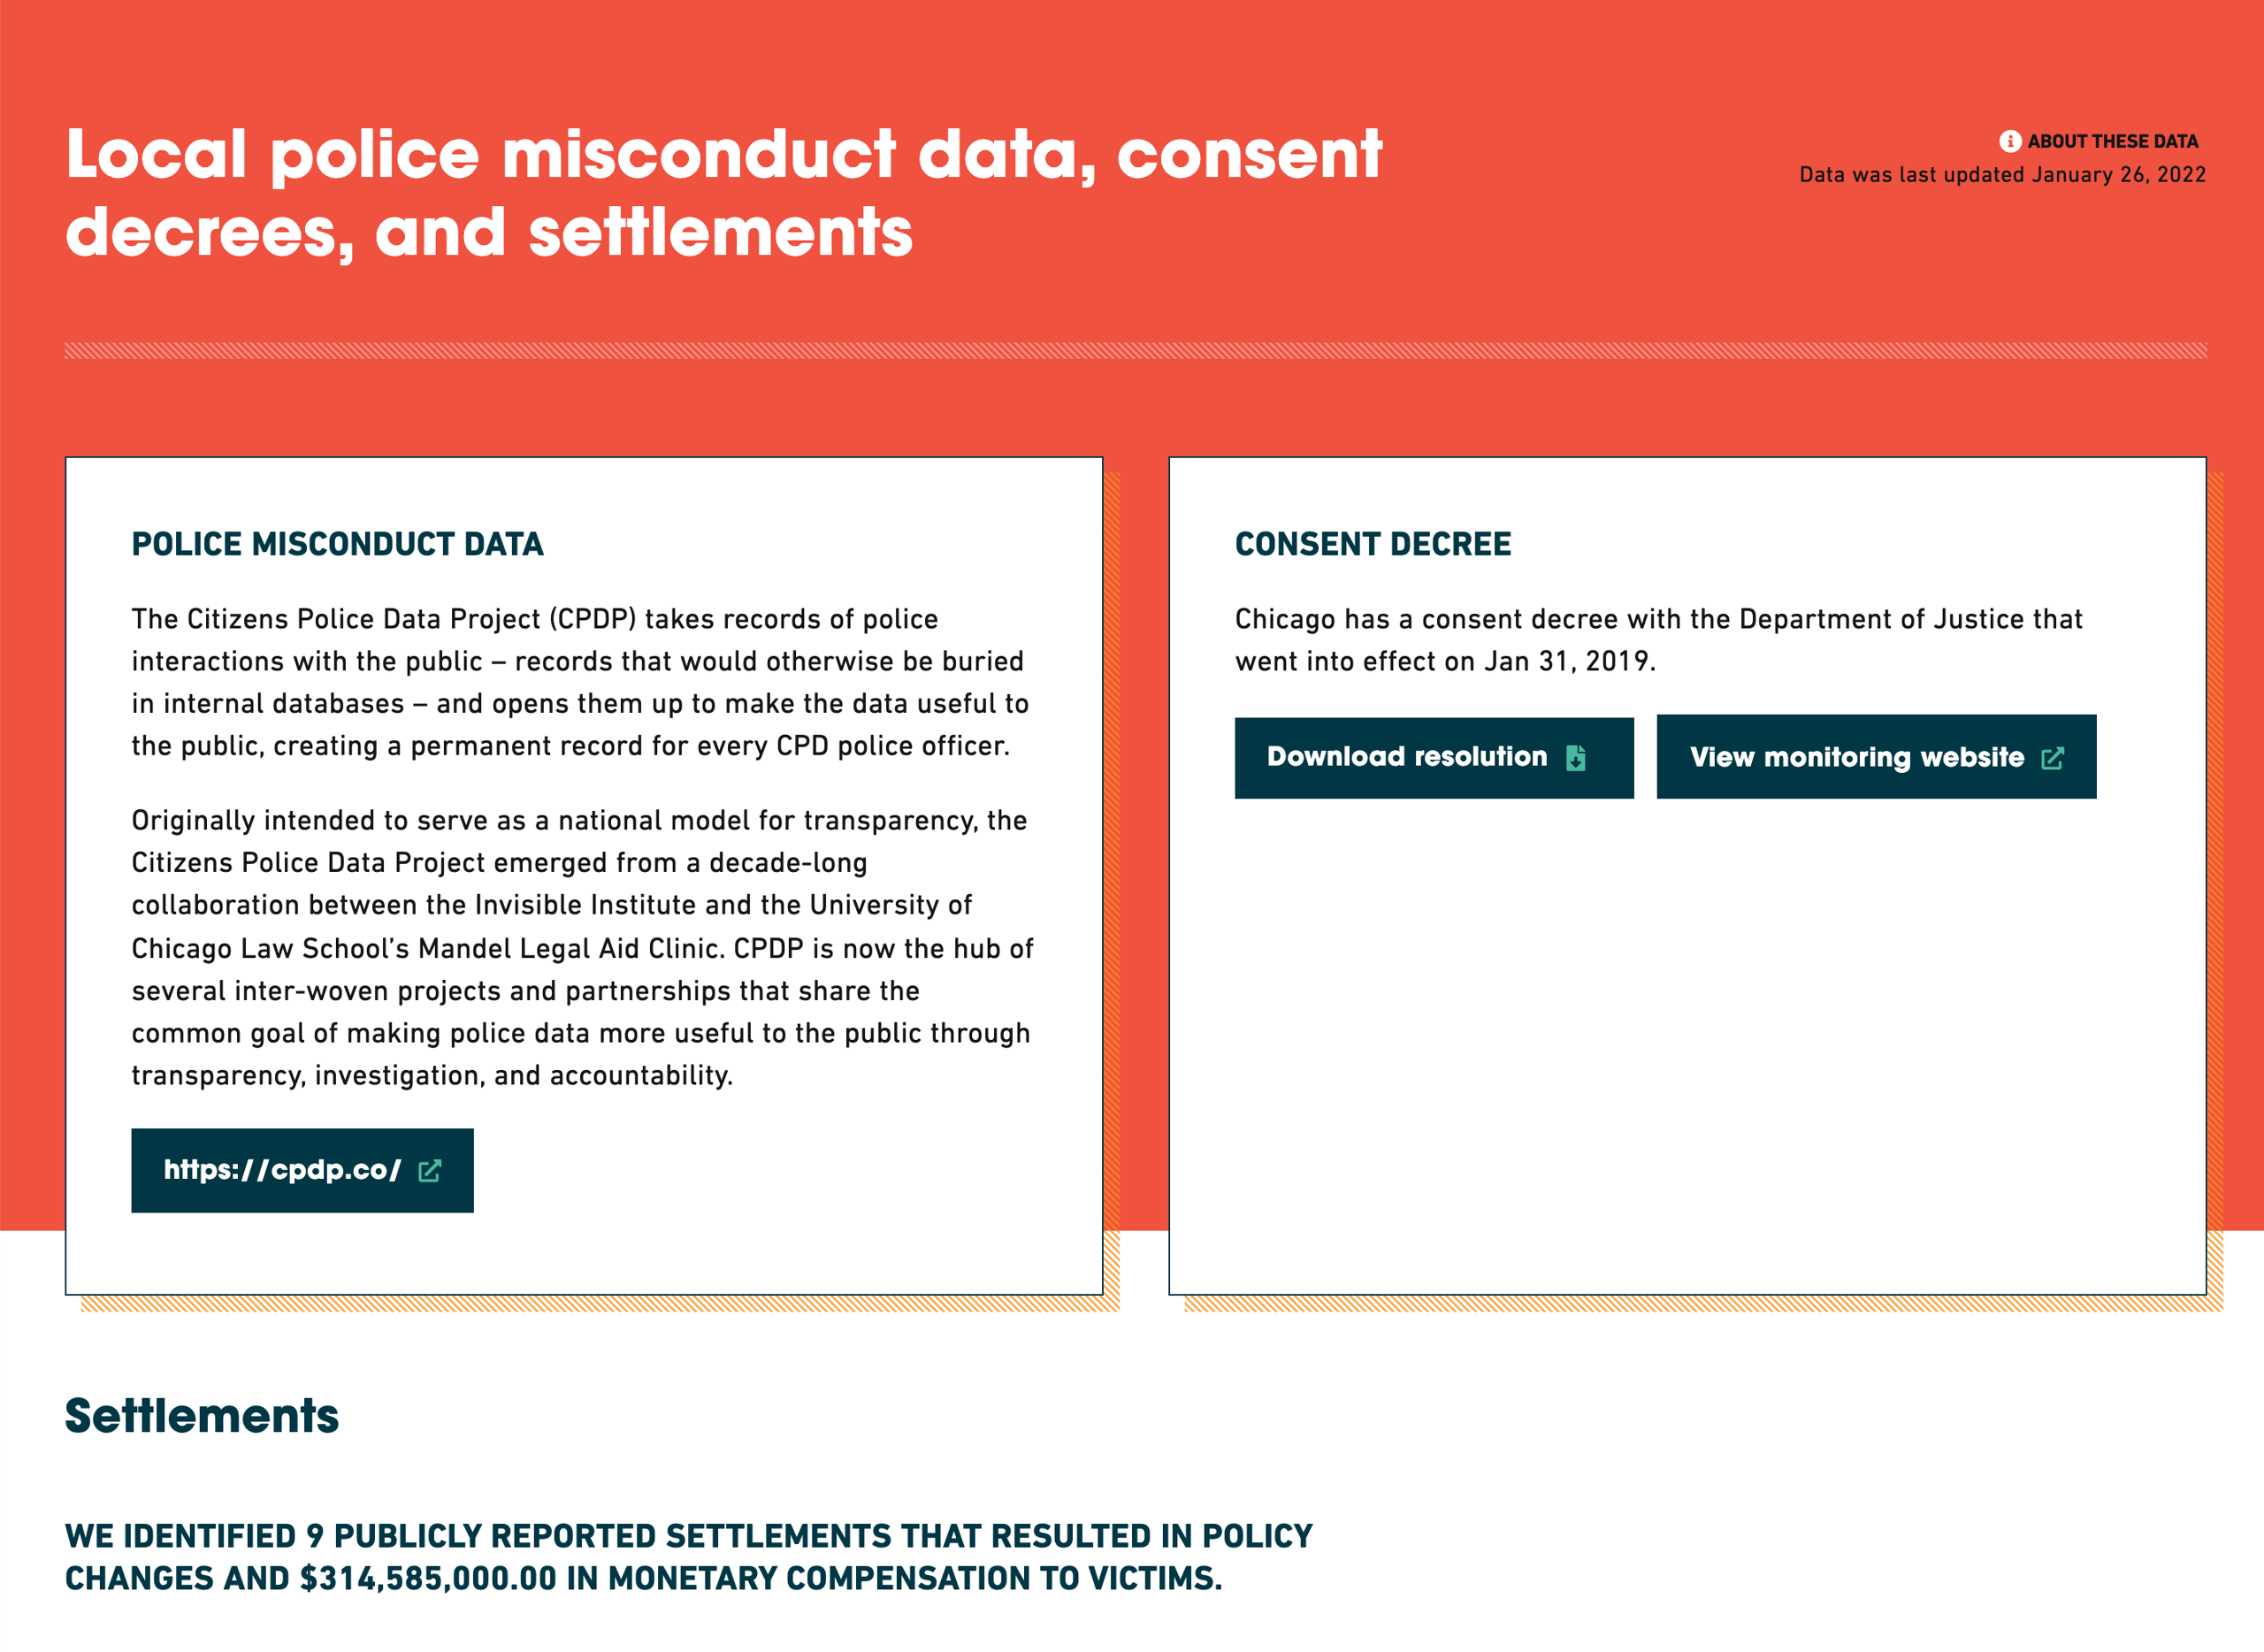 Screen shot of misconduct and settlements data